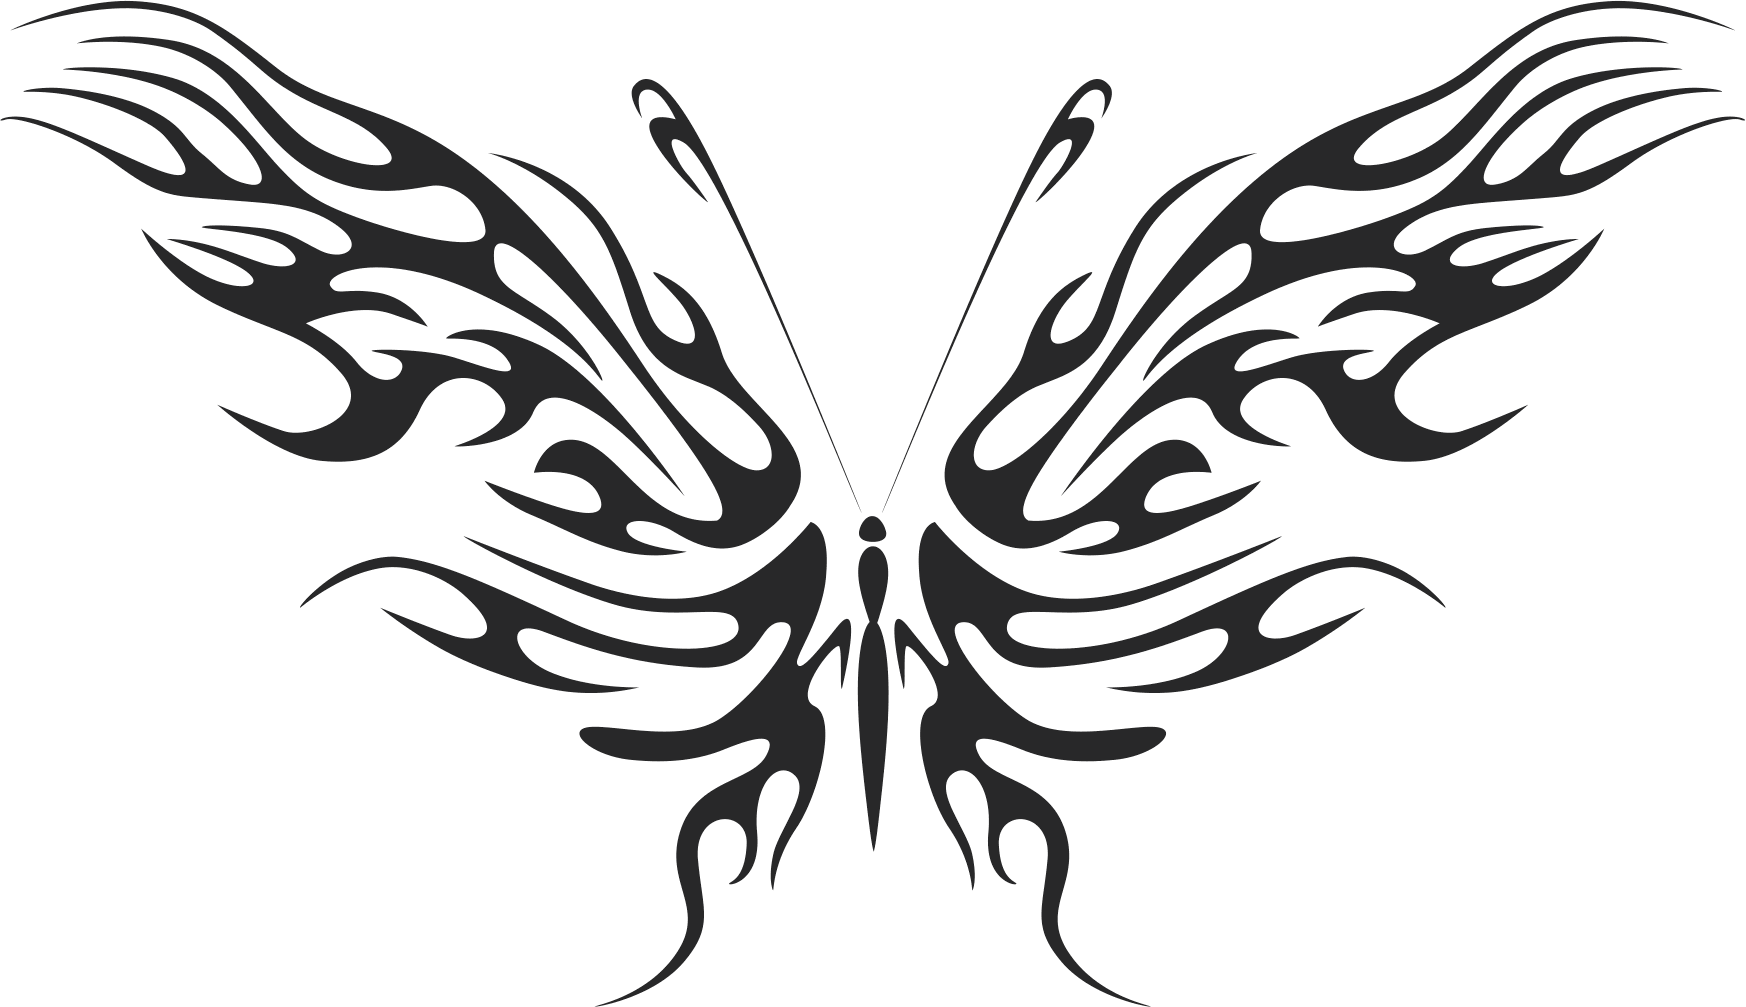 Tribal Butterfly Vector Art 09 Free DXF Vectors File